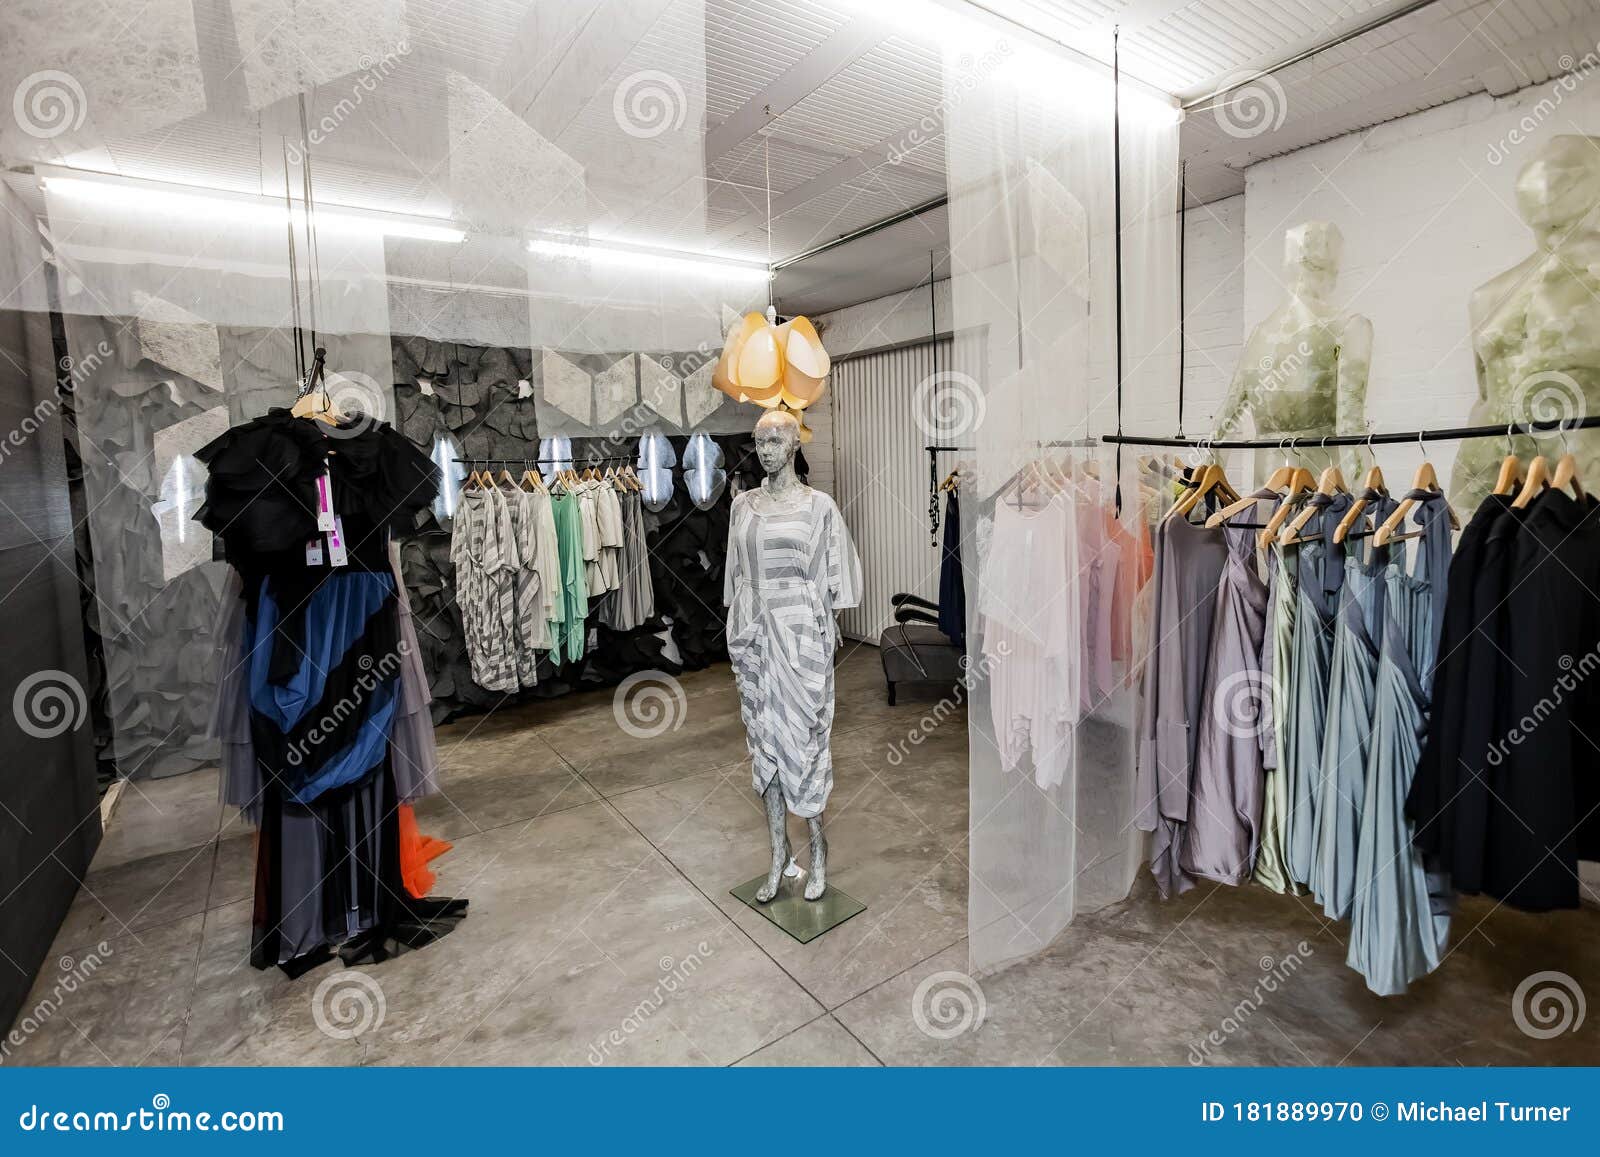 Inside Interior of a Small Independent Fashion Clothing Retail Store ...